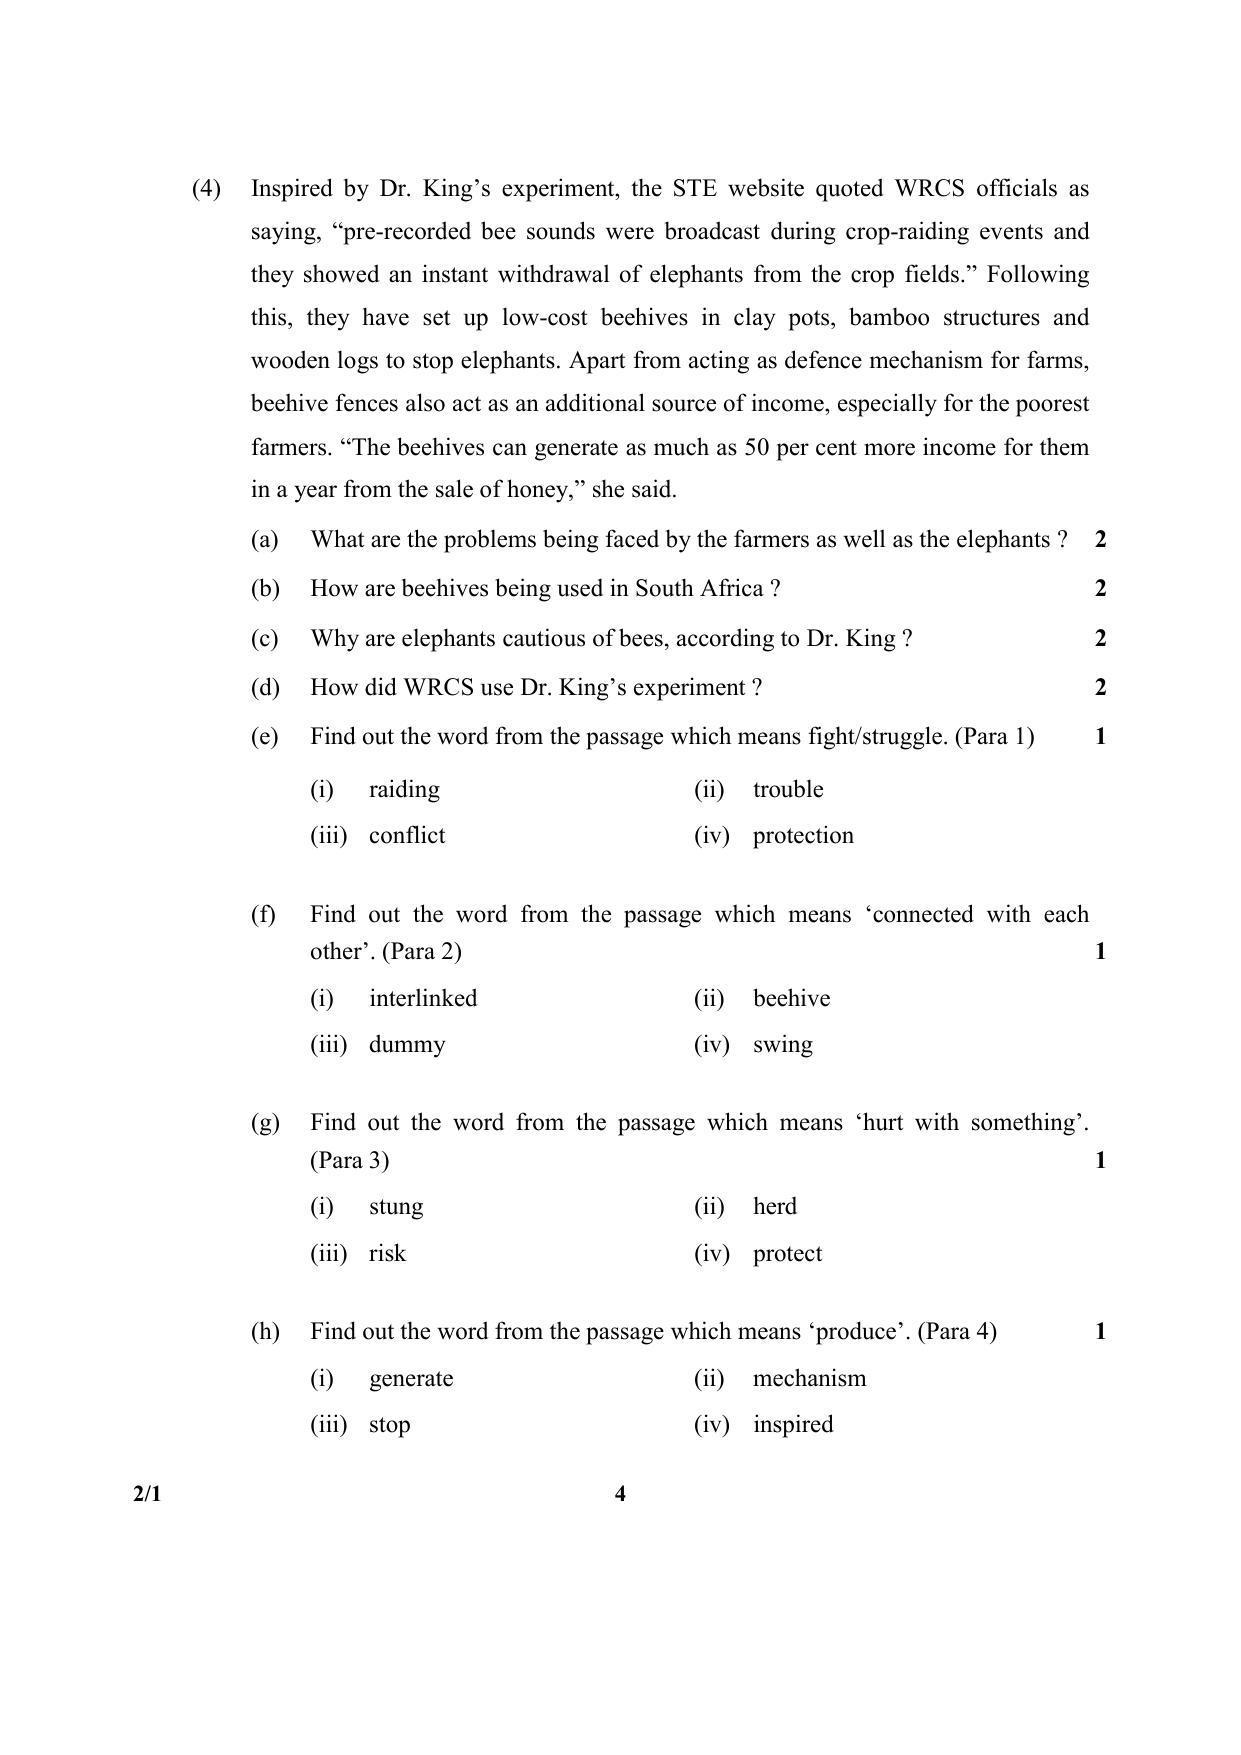 CBSE Class 10 2-1 English (Language And Literature) 2017-comptt Question Paper - Page 4